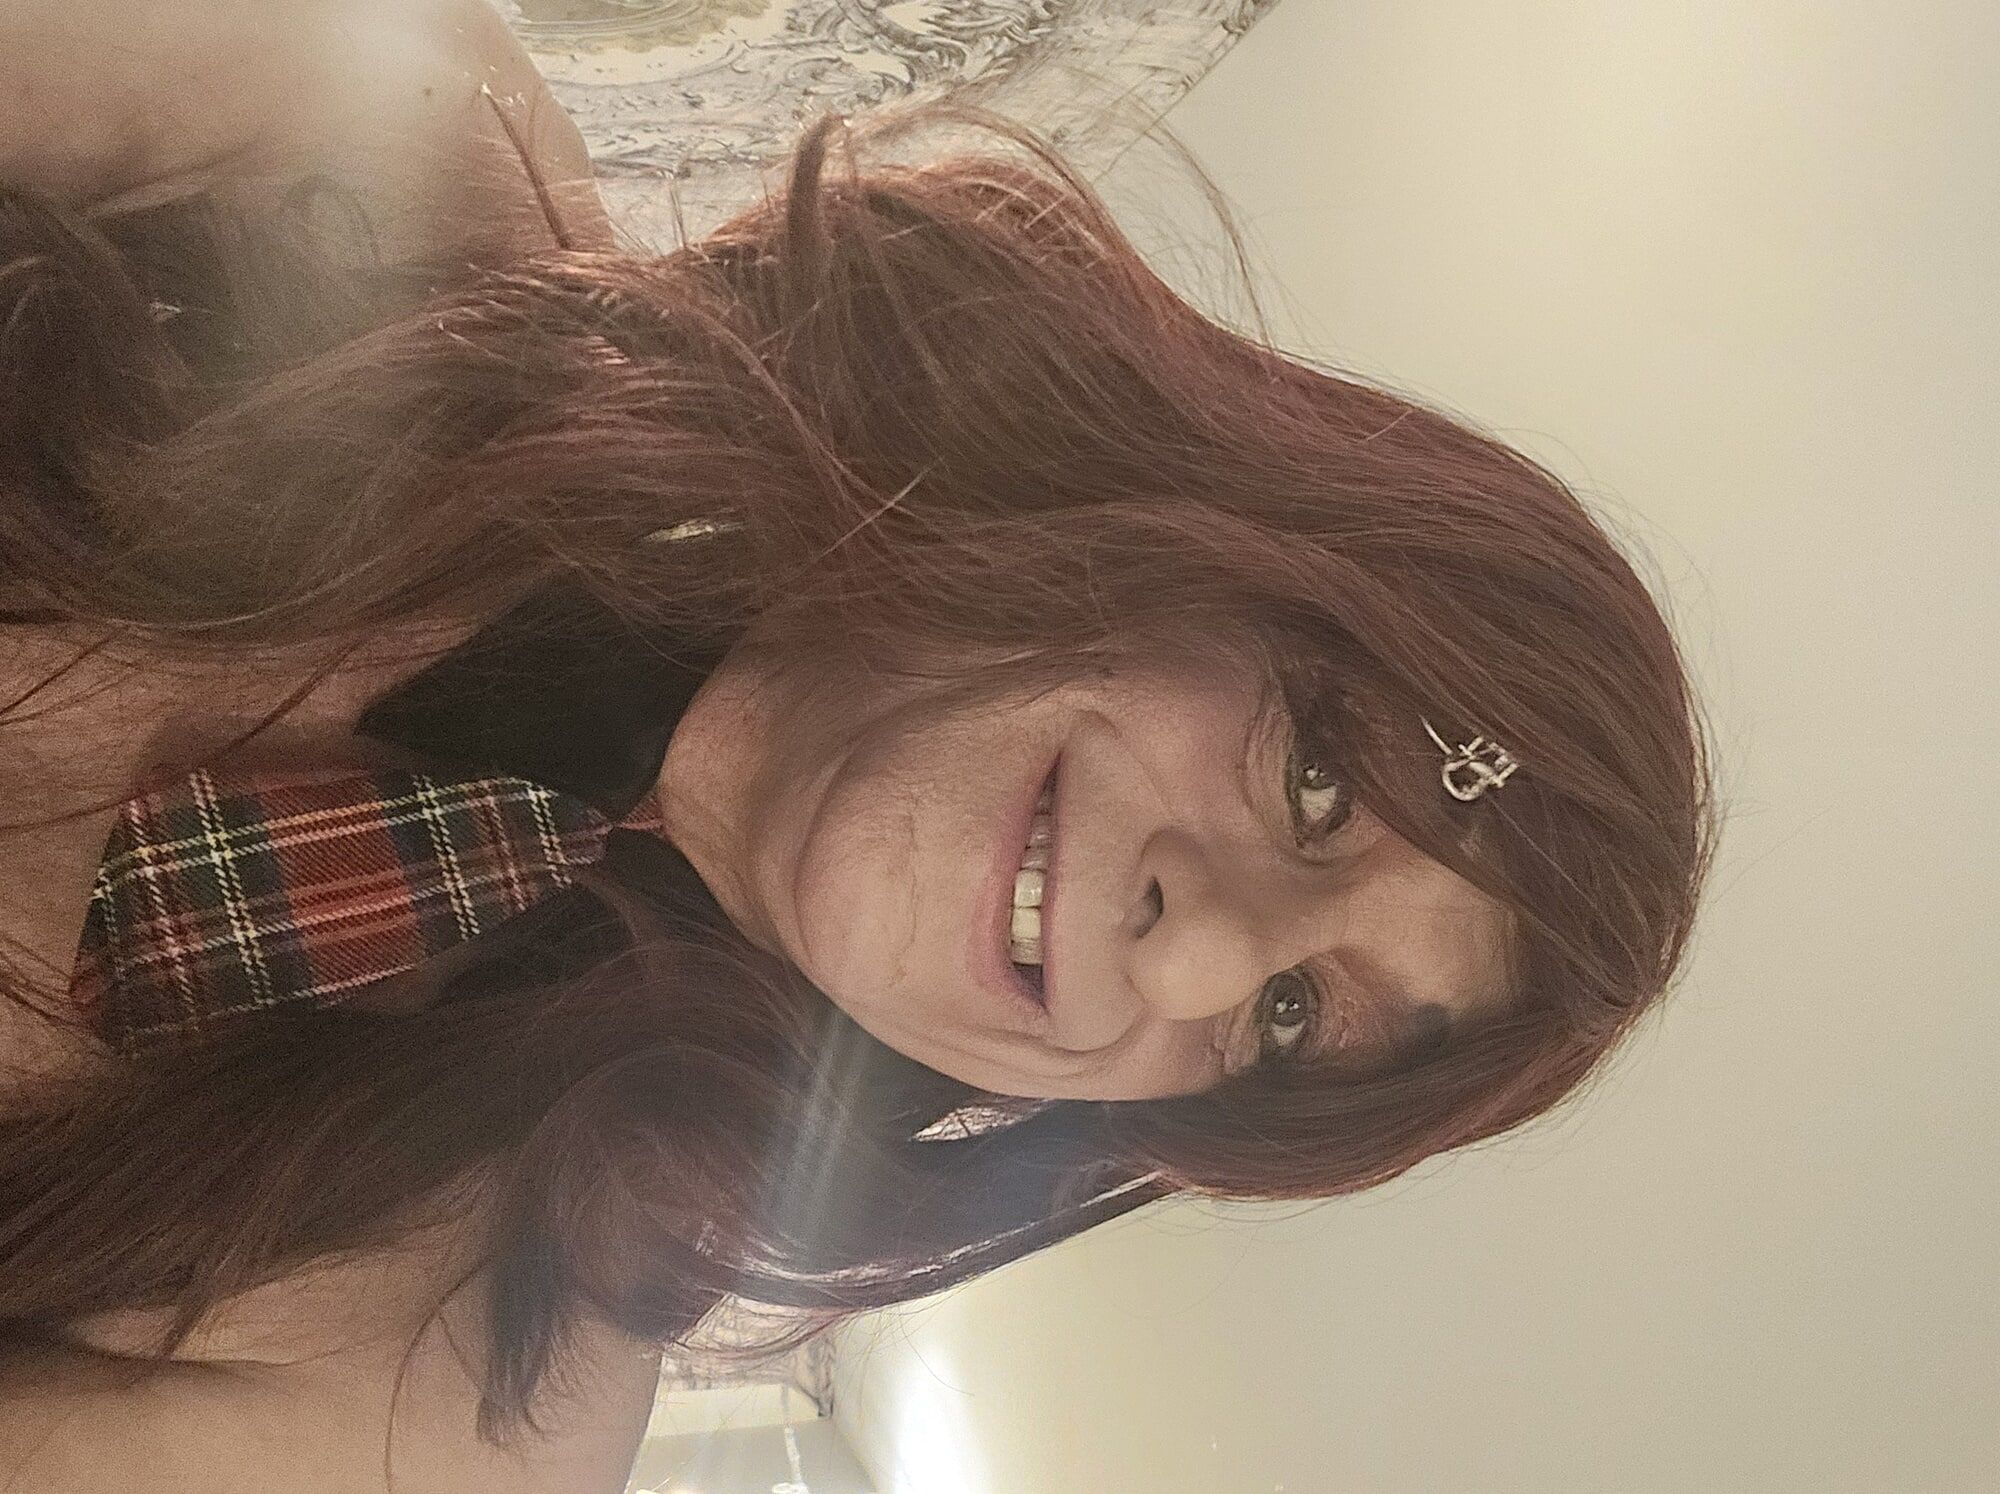 Being all pretty sissy crossdresser with a new look #12